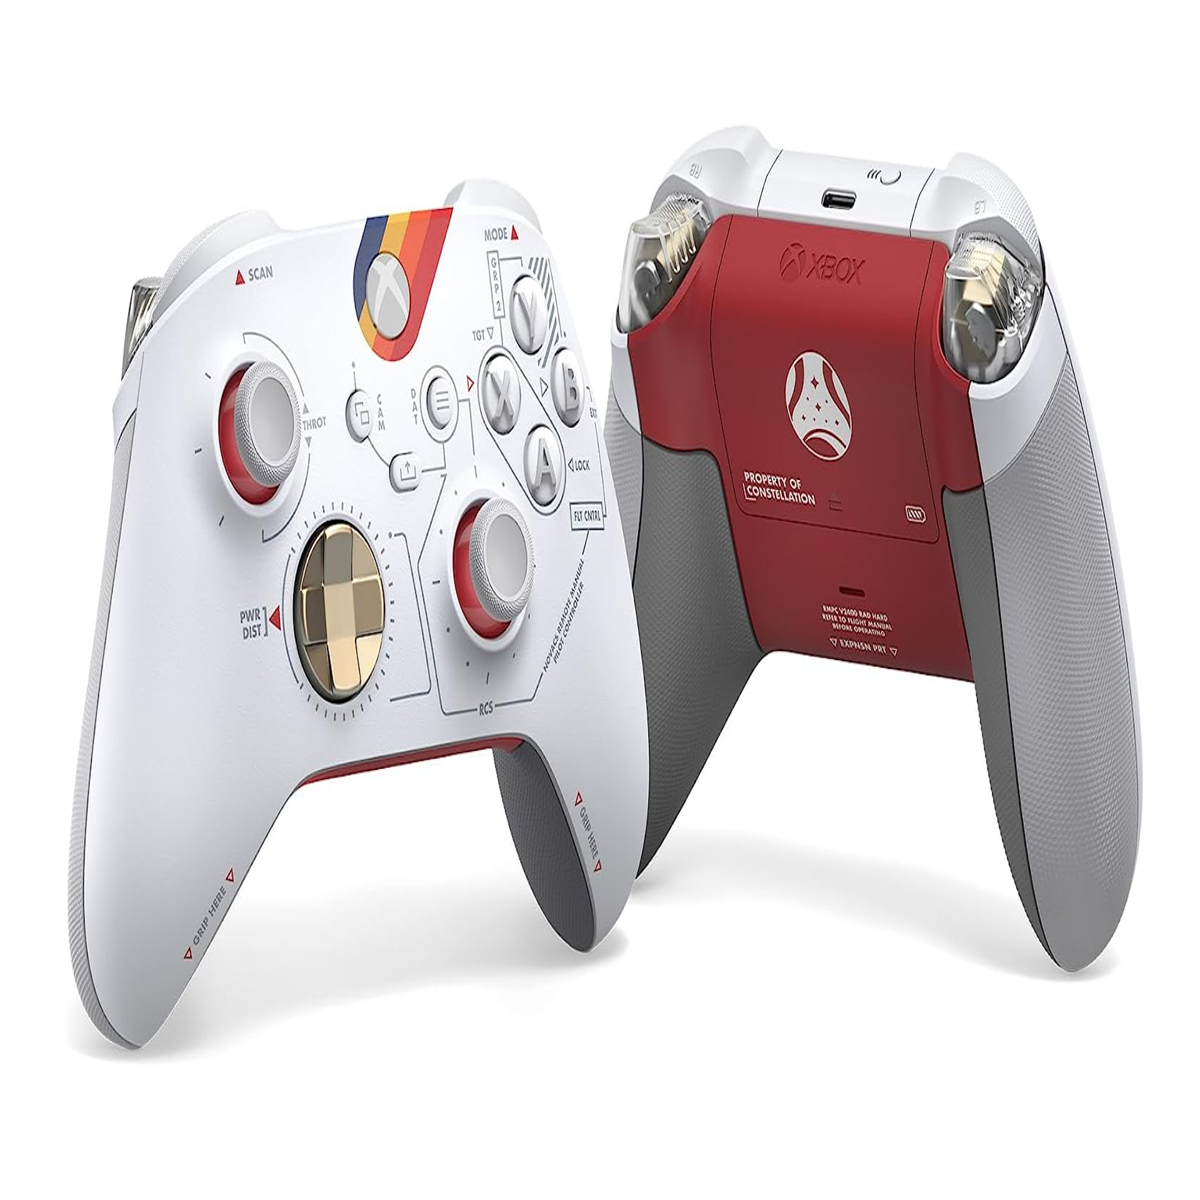 Pick up the awesome Starfield Xbox controller for the lowest price 